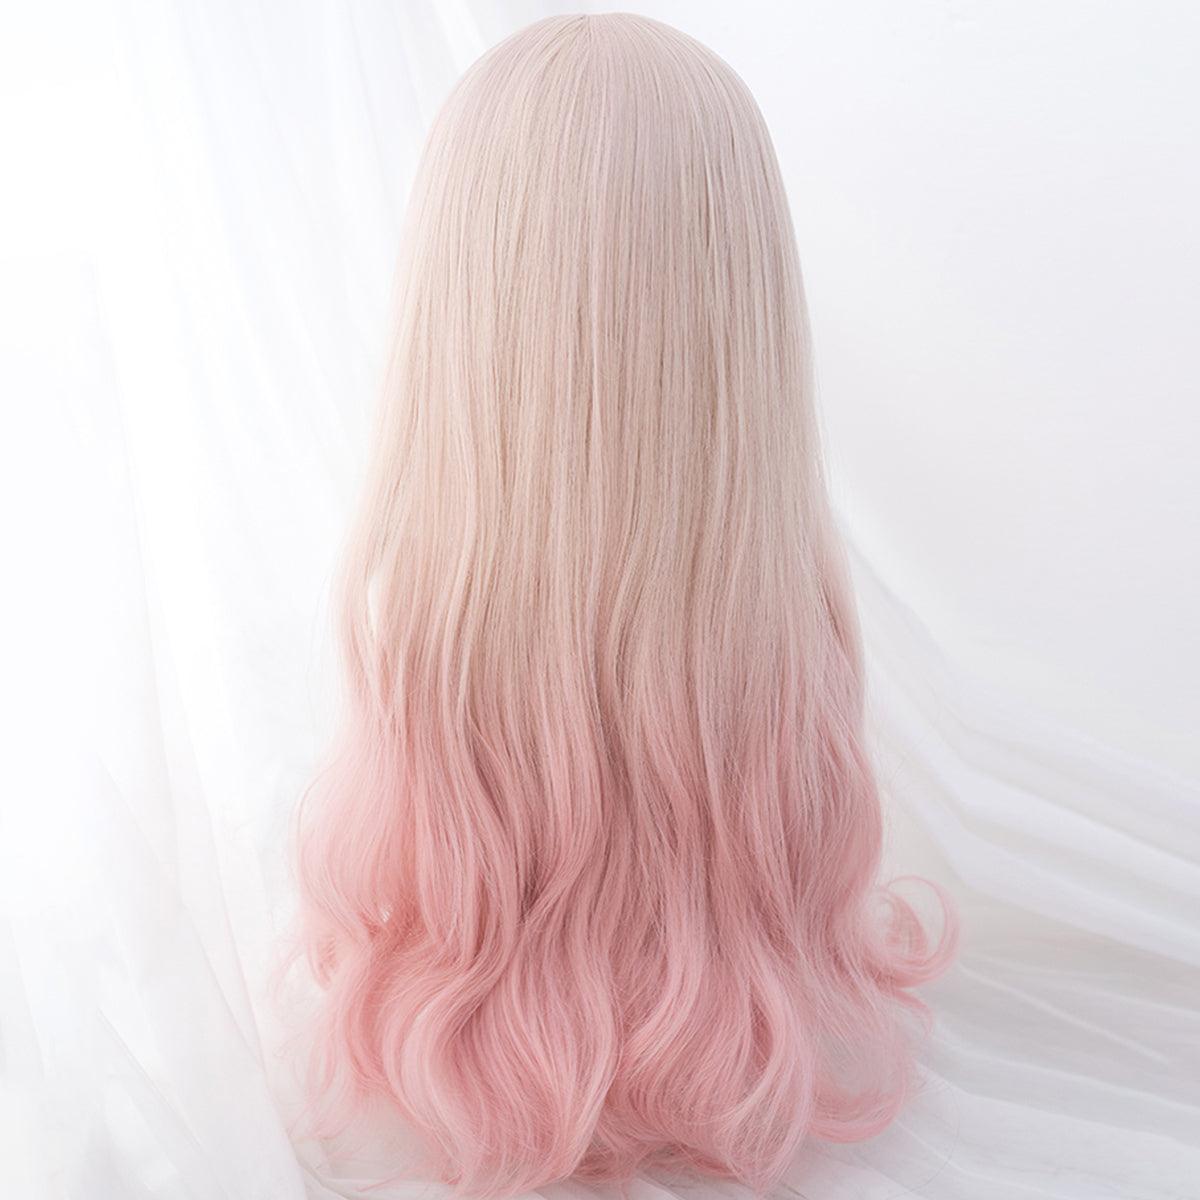 Lush preppy Aesthetic Wavy Hair in Blonde to Pink